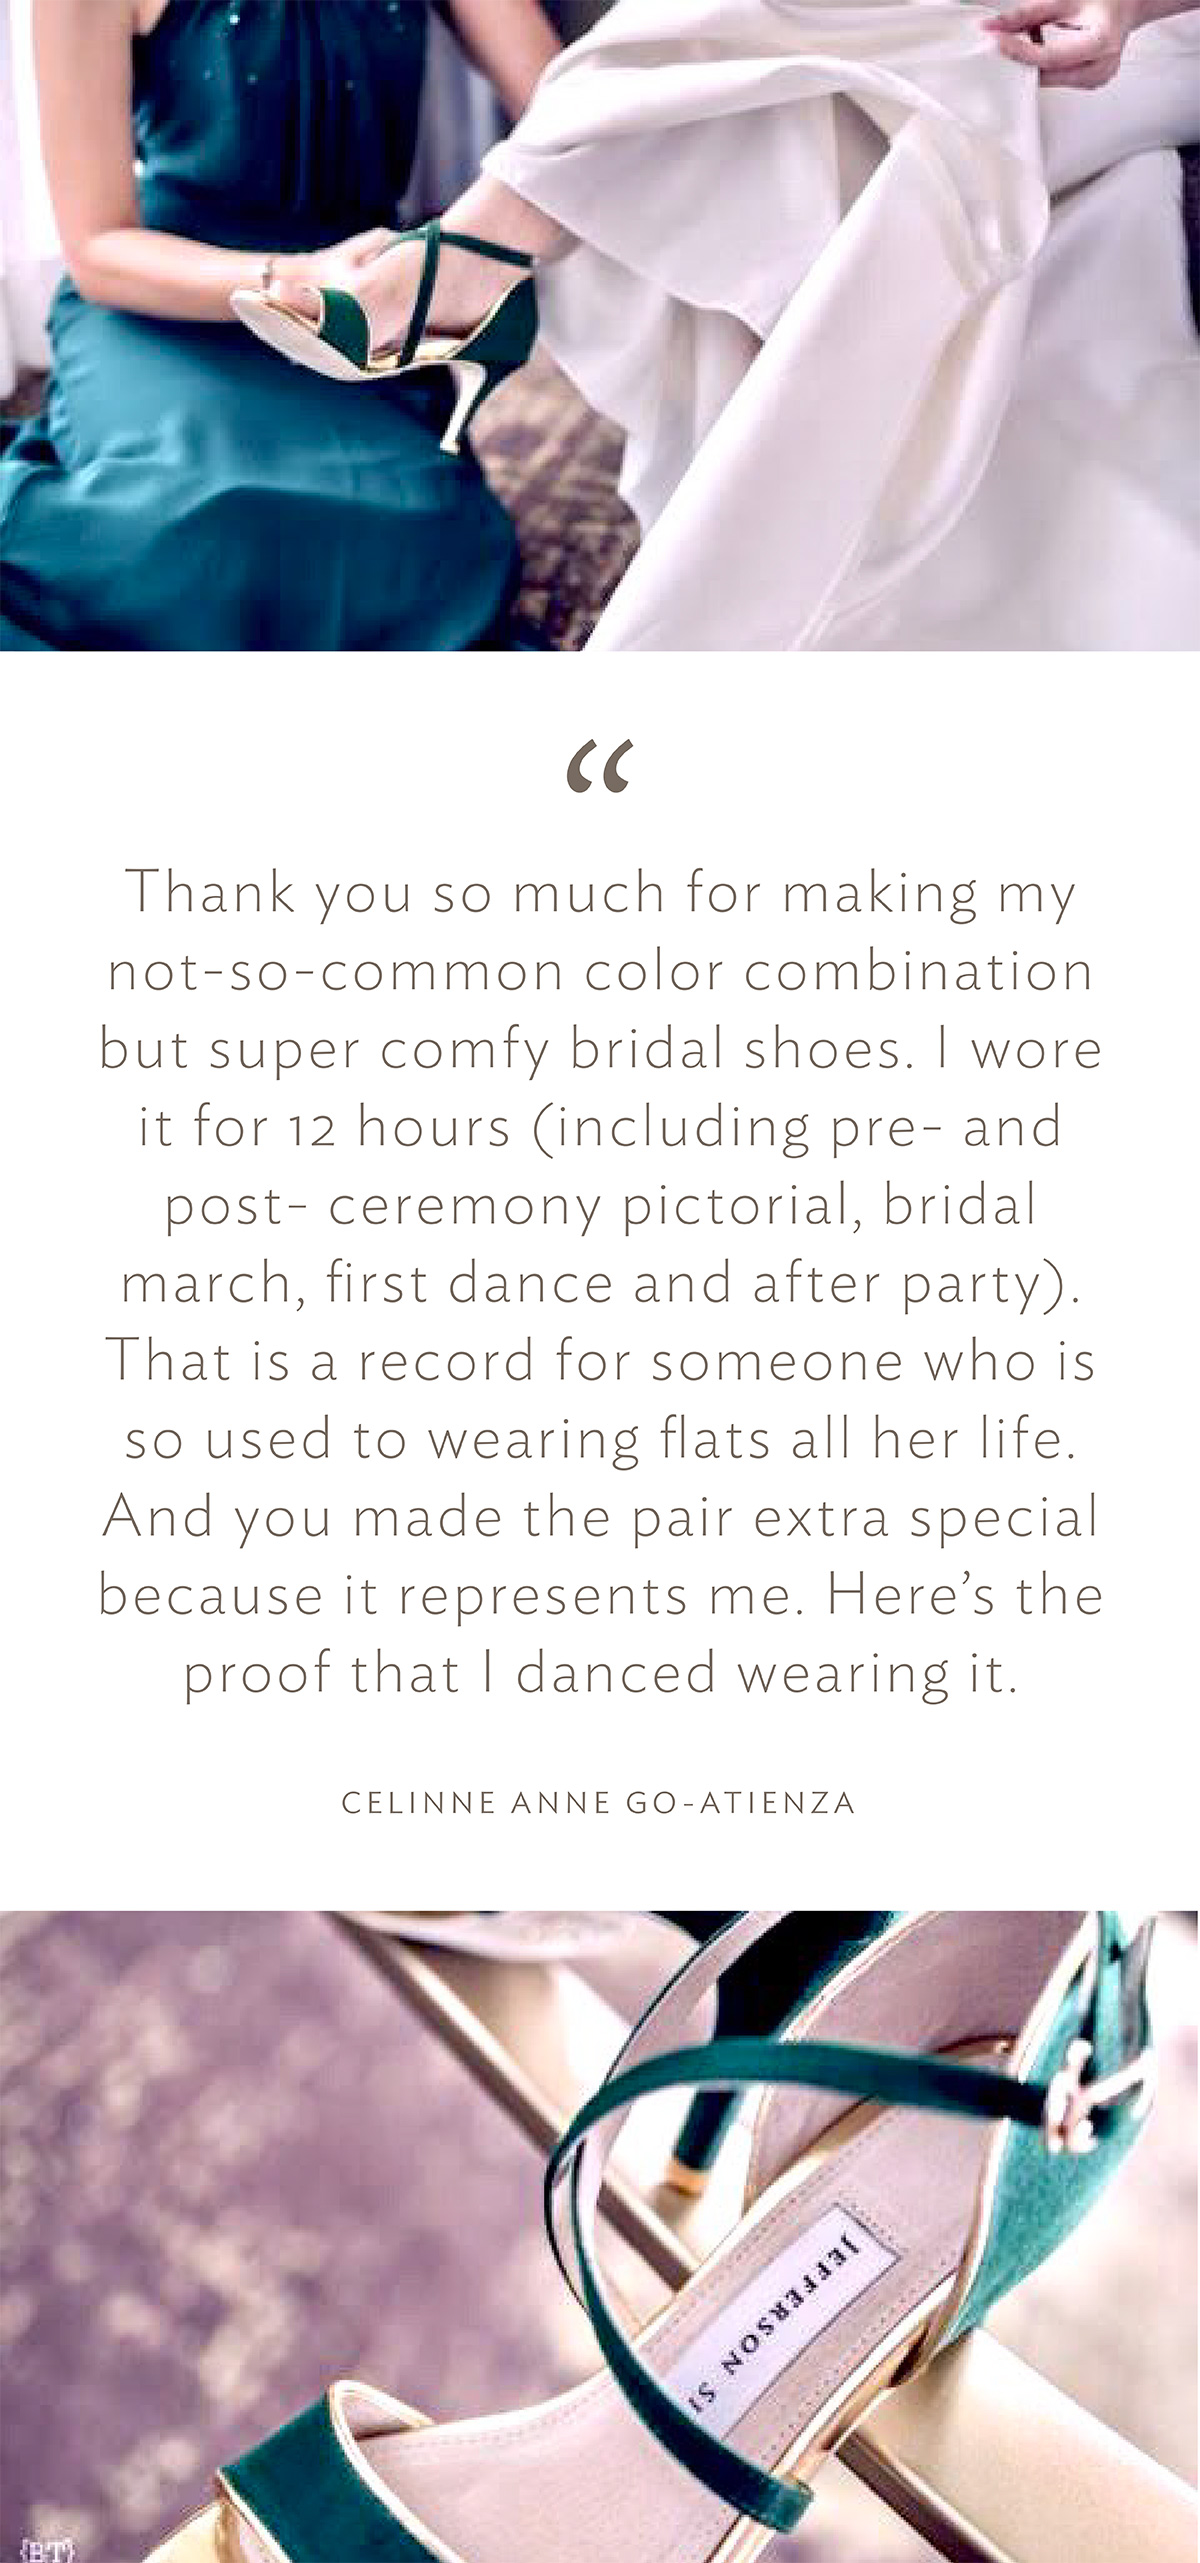 “Thank you so much for making my not-so-common color combination but super comfy bridal shoes. I wore it for 12 hours (including pre- and post-ceremony pictorial, bridal march, first dance and after party). That is a record for someone who is so used to wearing flats all her life. And you made the pair extra special because it represents me. Here’s the proof that I danced wearing it.” (Celine Anne Go-Atienza)